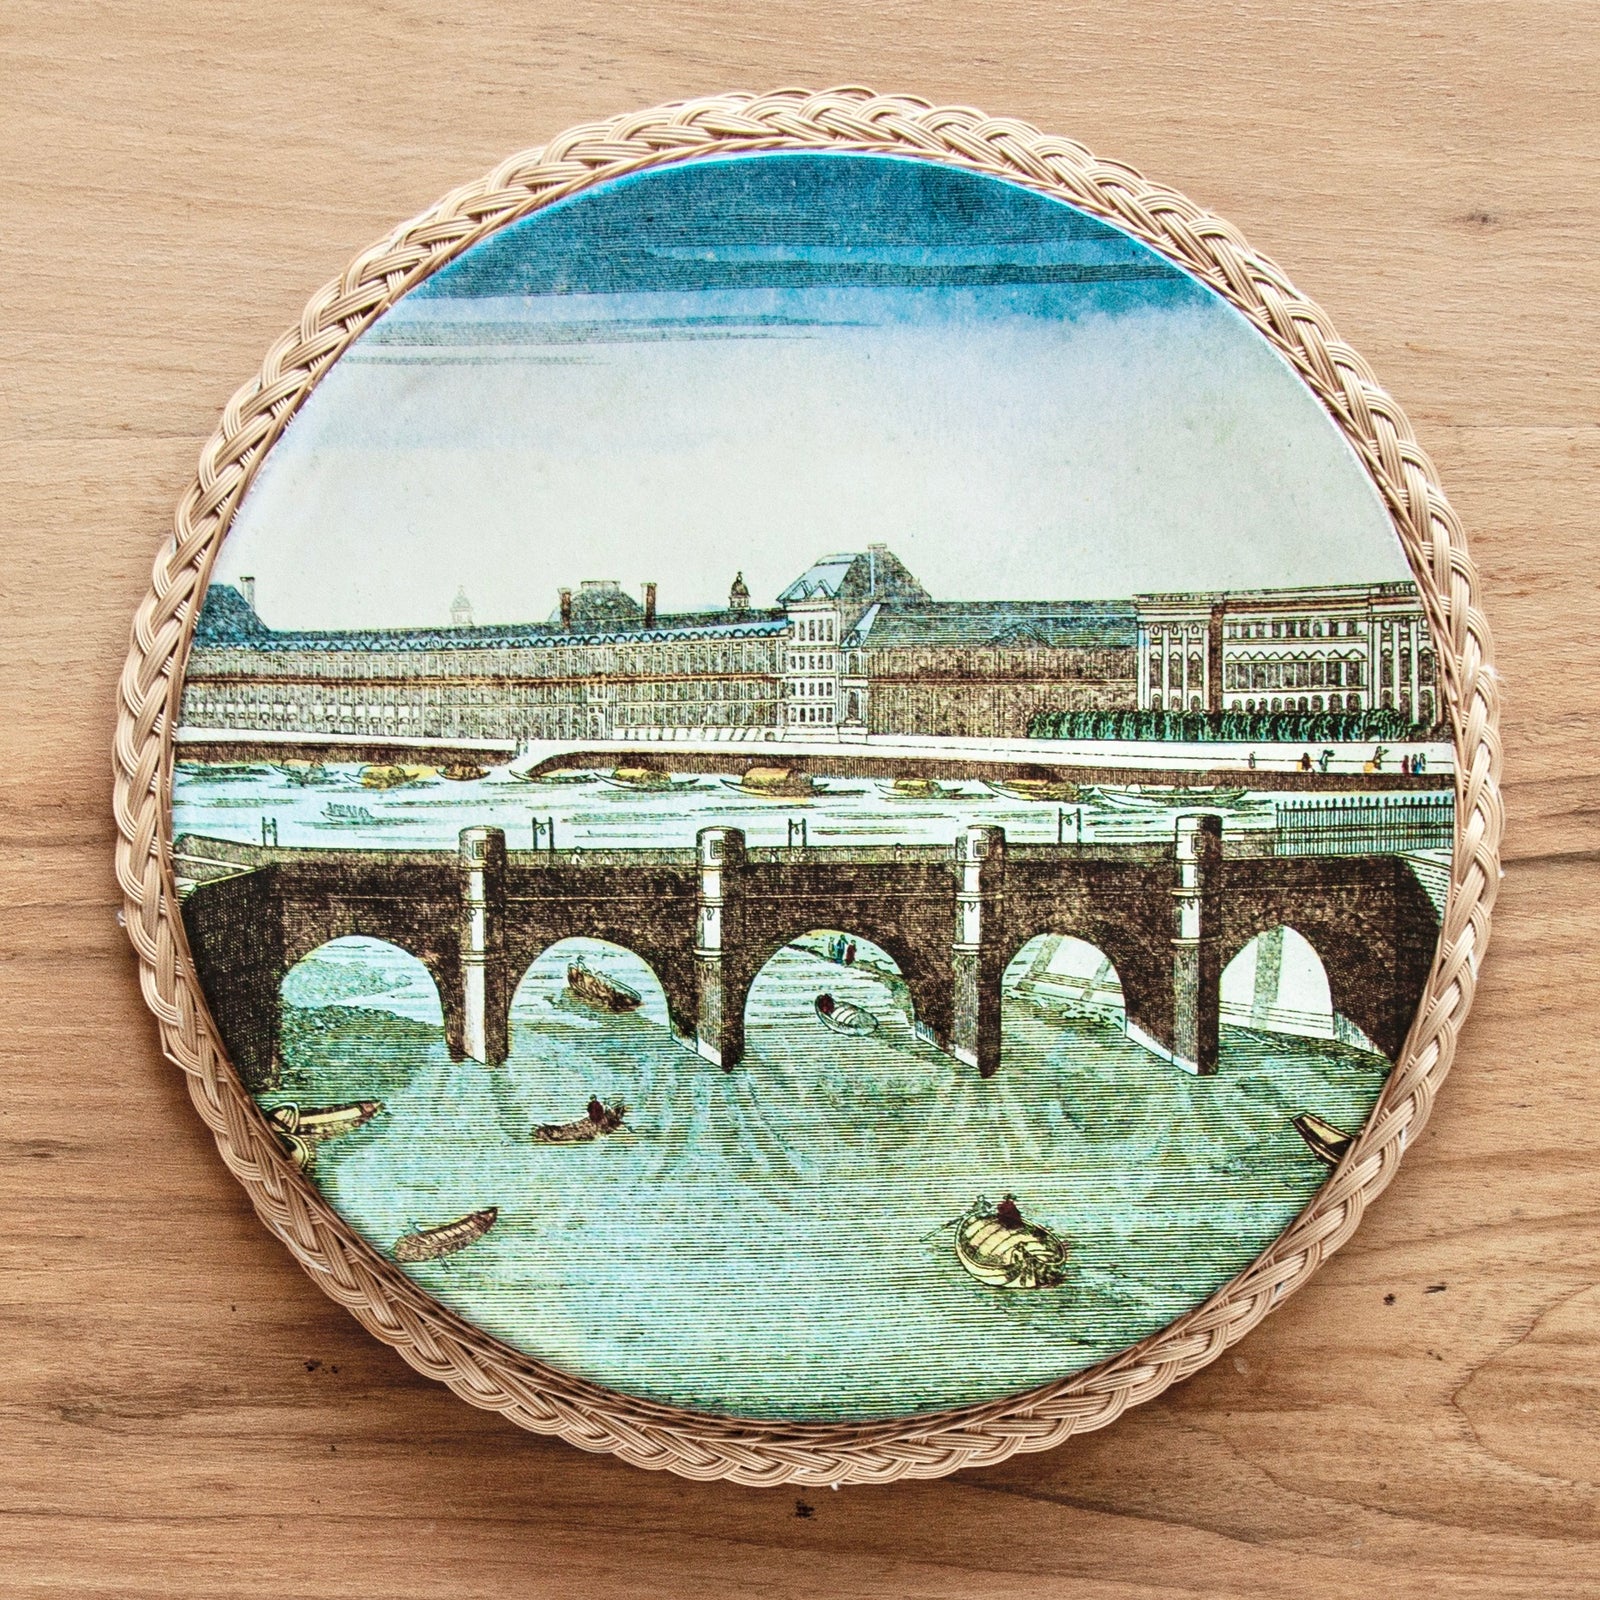 Vauxhall Gardens Dinner Plates with Bridge on Rattan Placemat